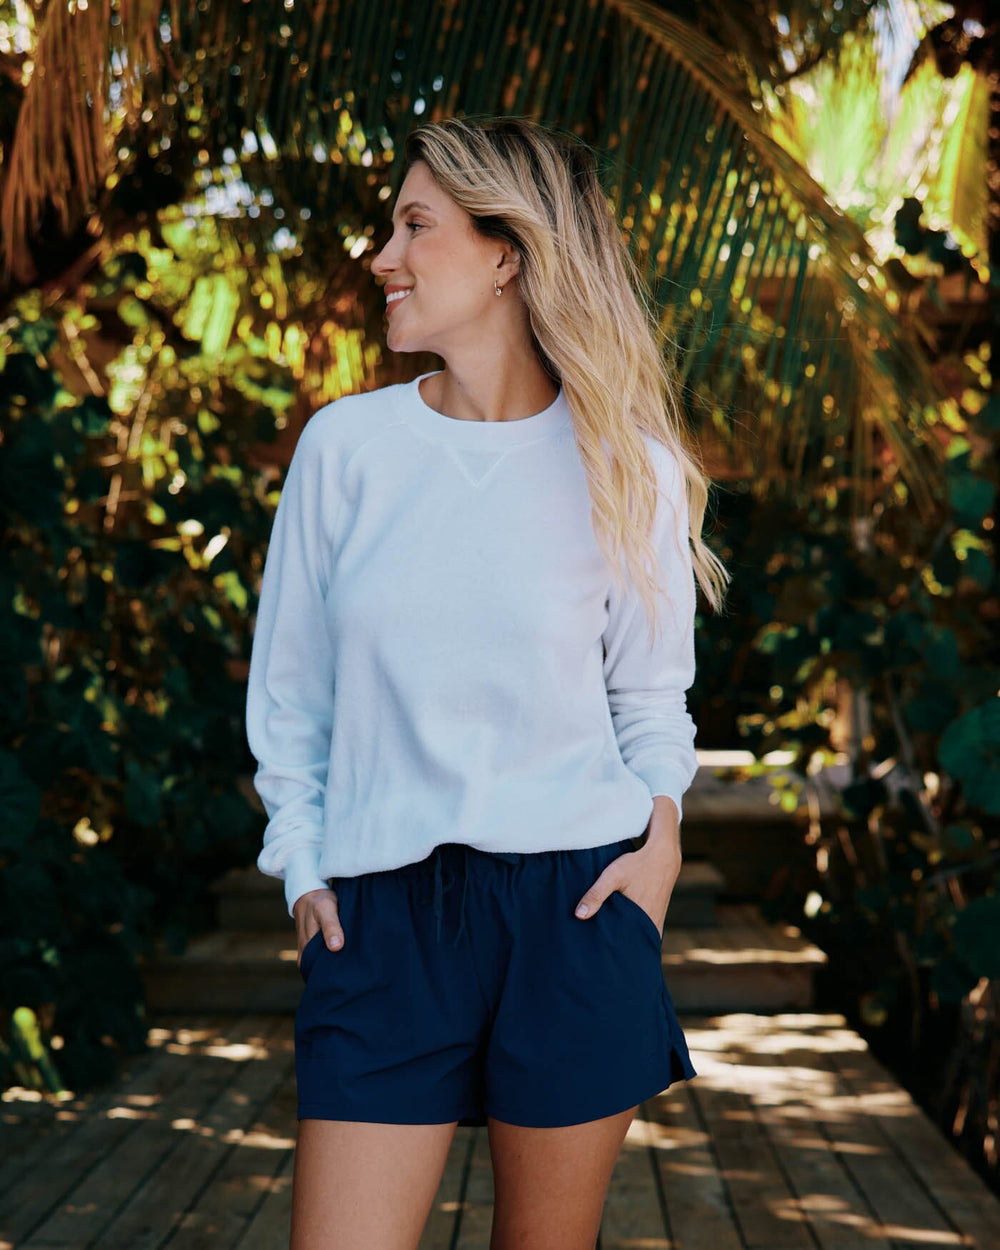 The front view of the Southern Tide Seaside Retreat Sweatshirt by Southern Tide - Classic White